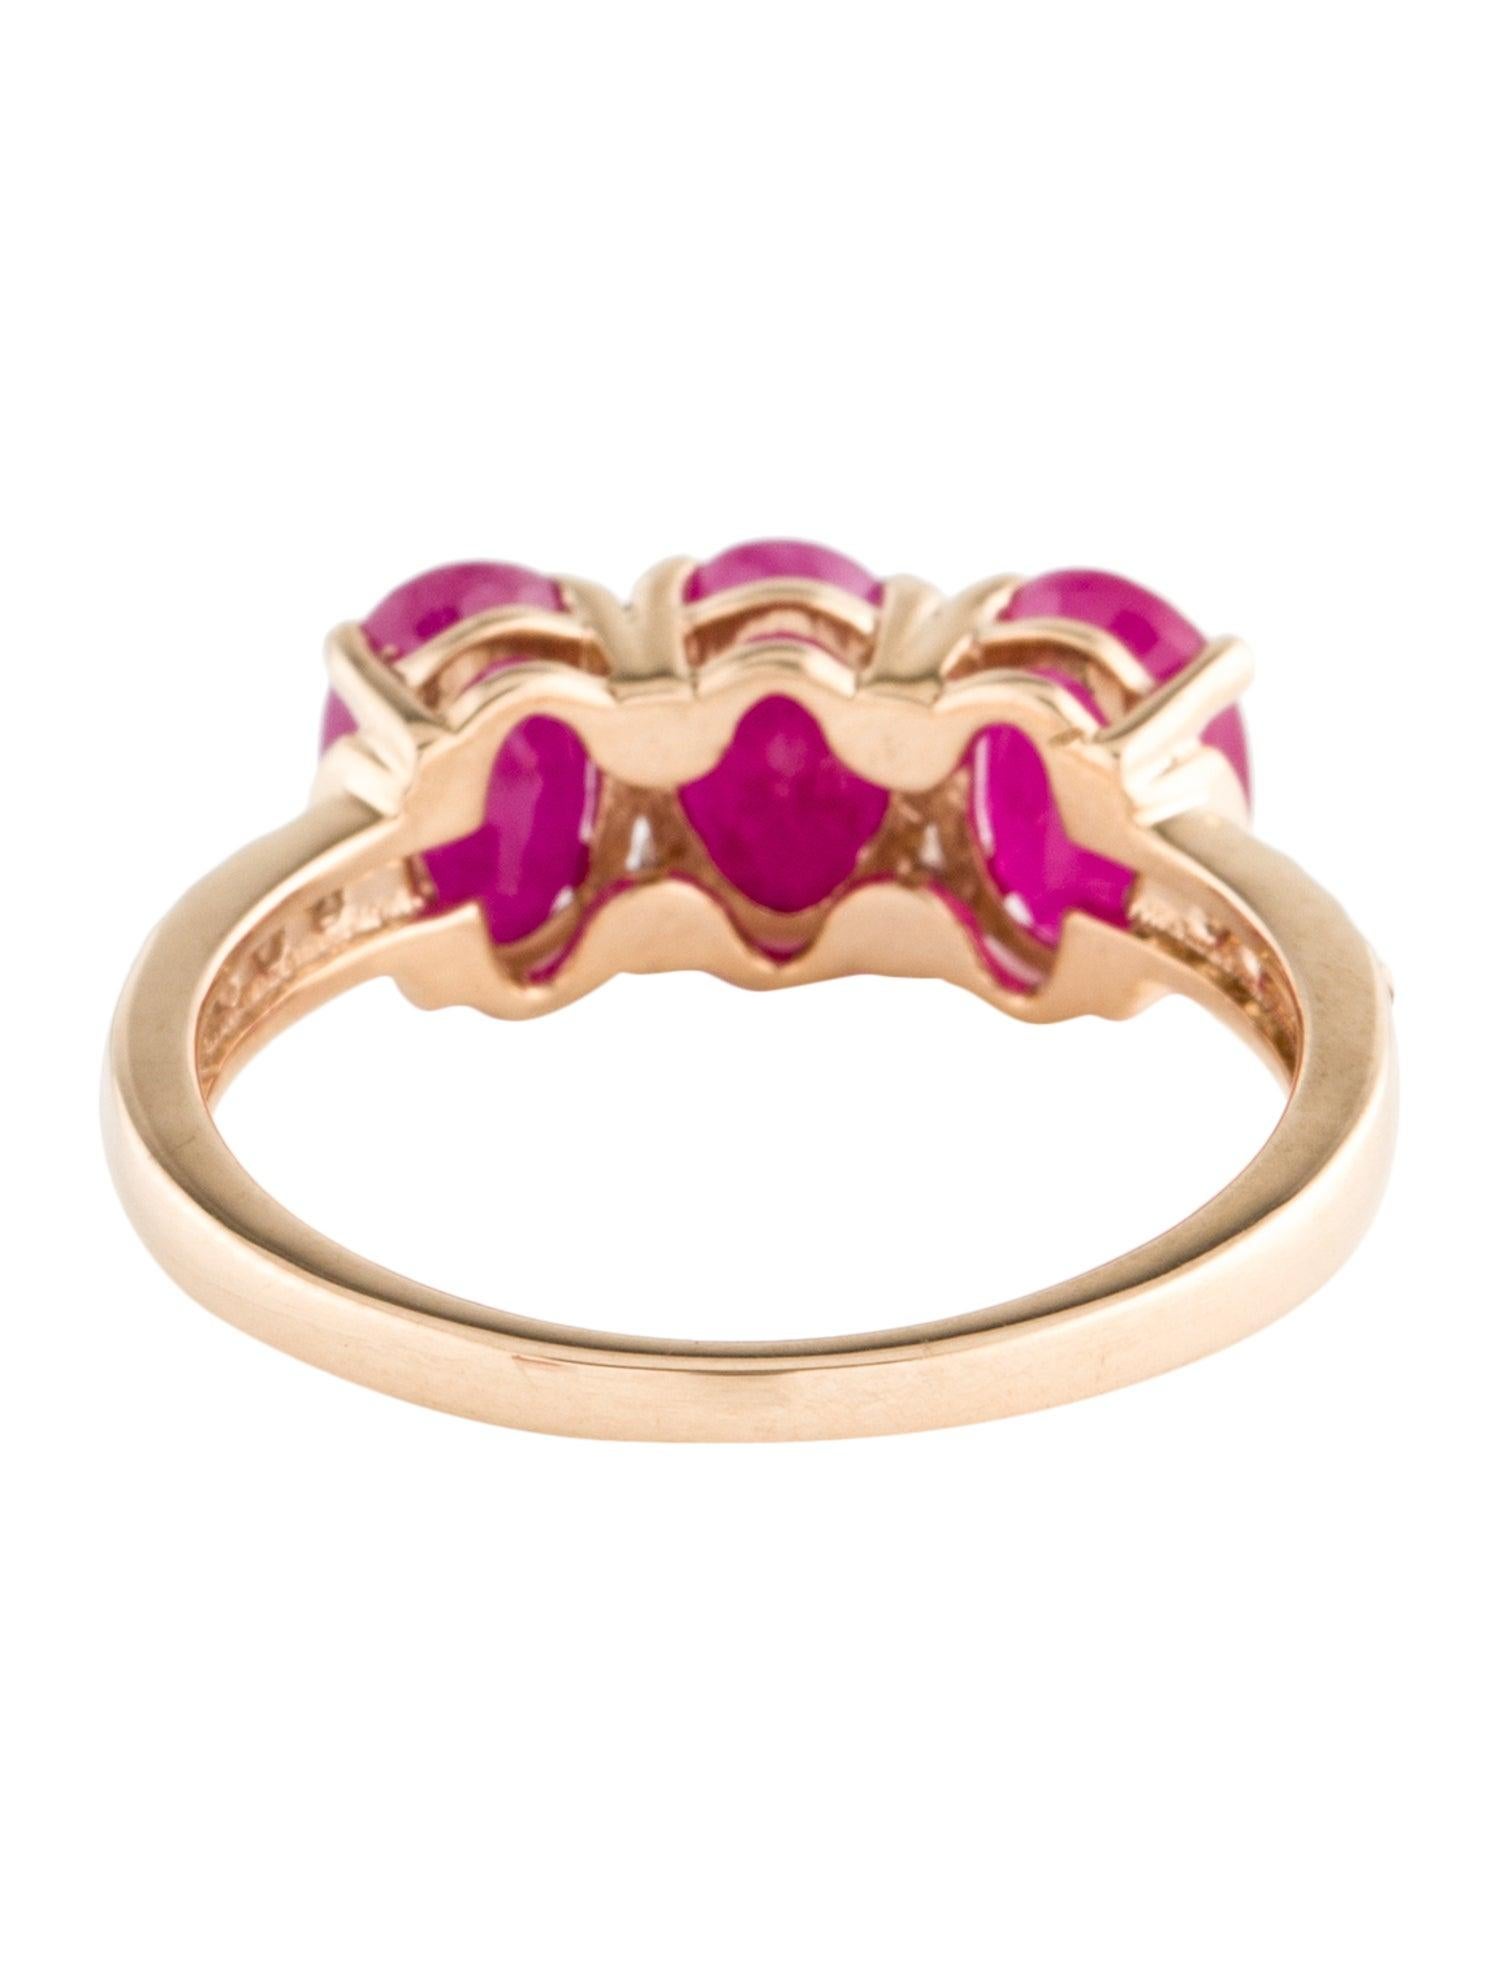 Oval Cut Luxurious 14K Ruby & Diamond Cocktail Band Ring - Size 6.75 - Statement Jewelry For Sale